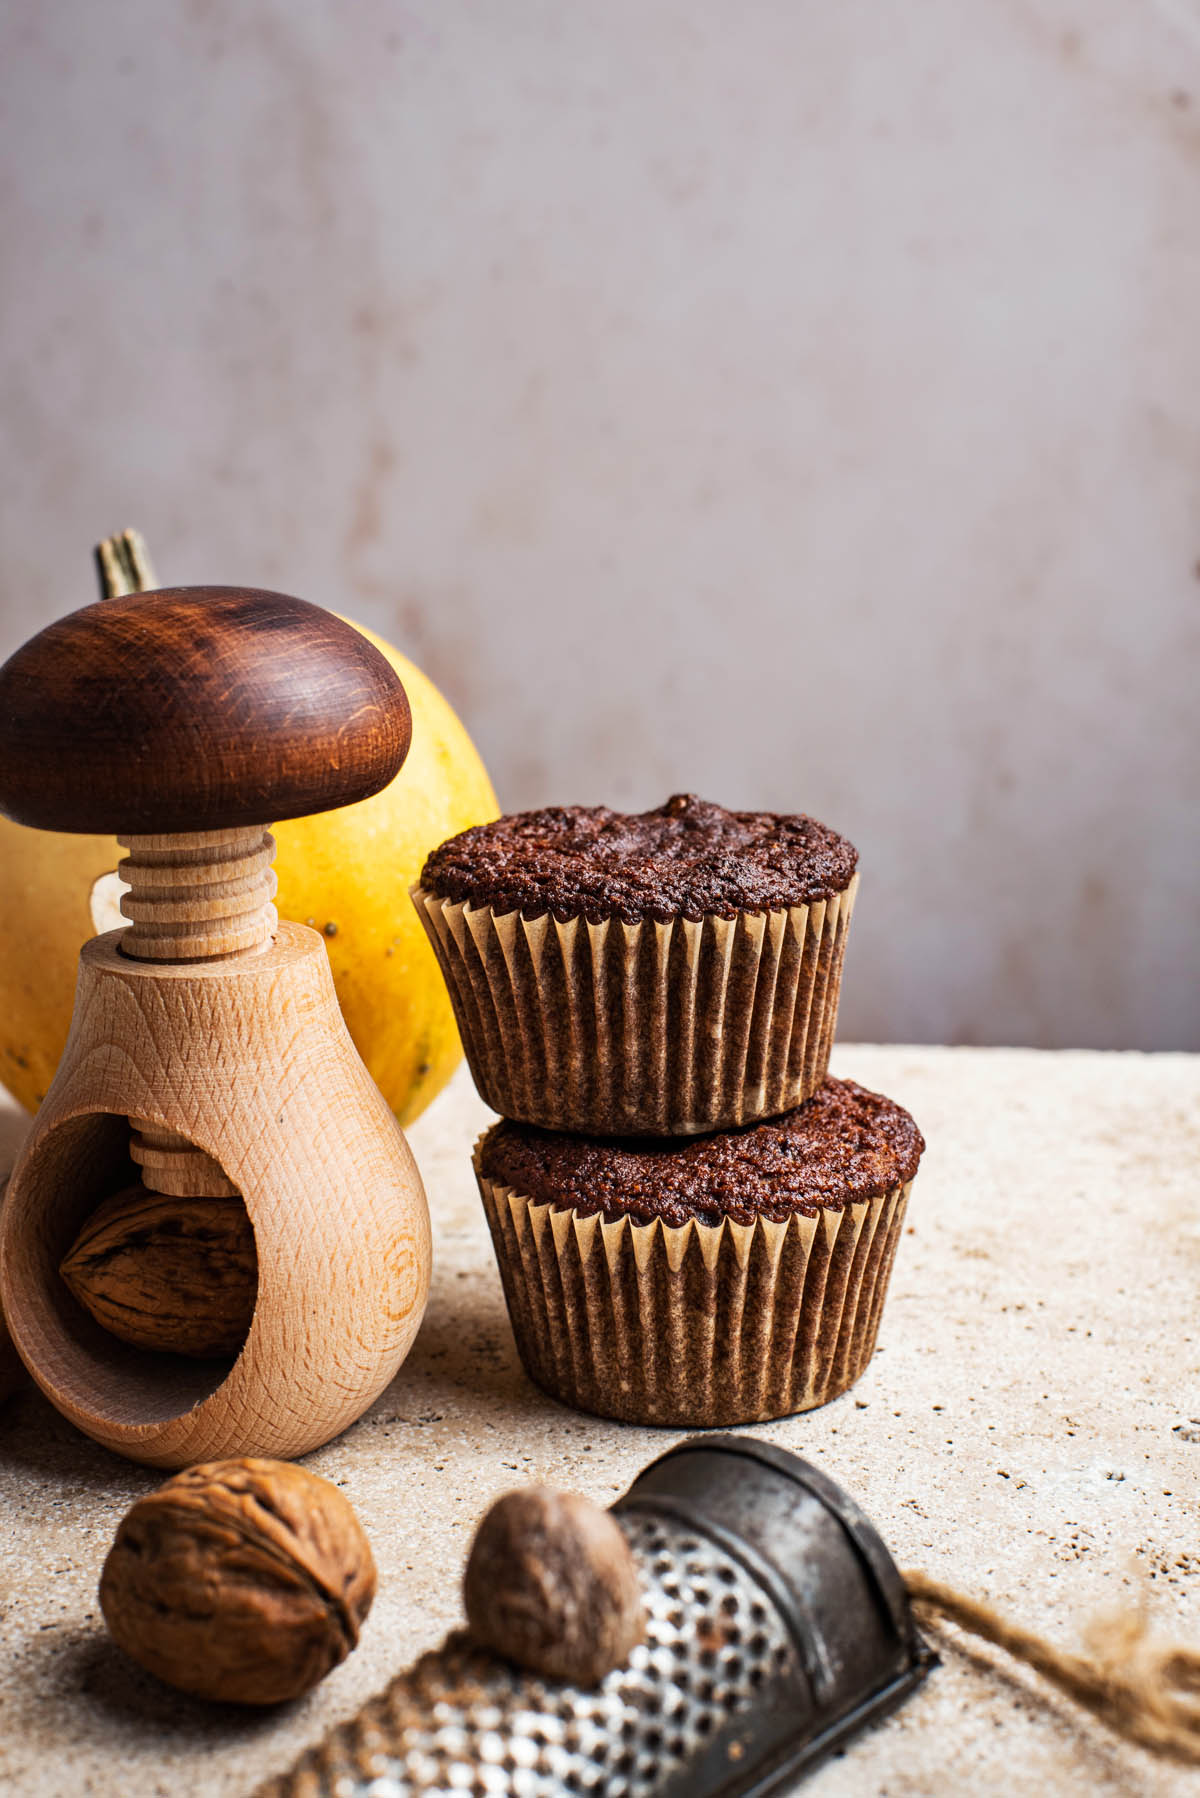 Two muffin stacked with a mushroom nutcracker and nutmeg grater.